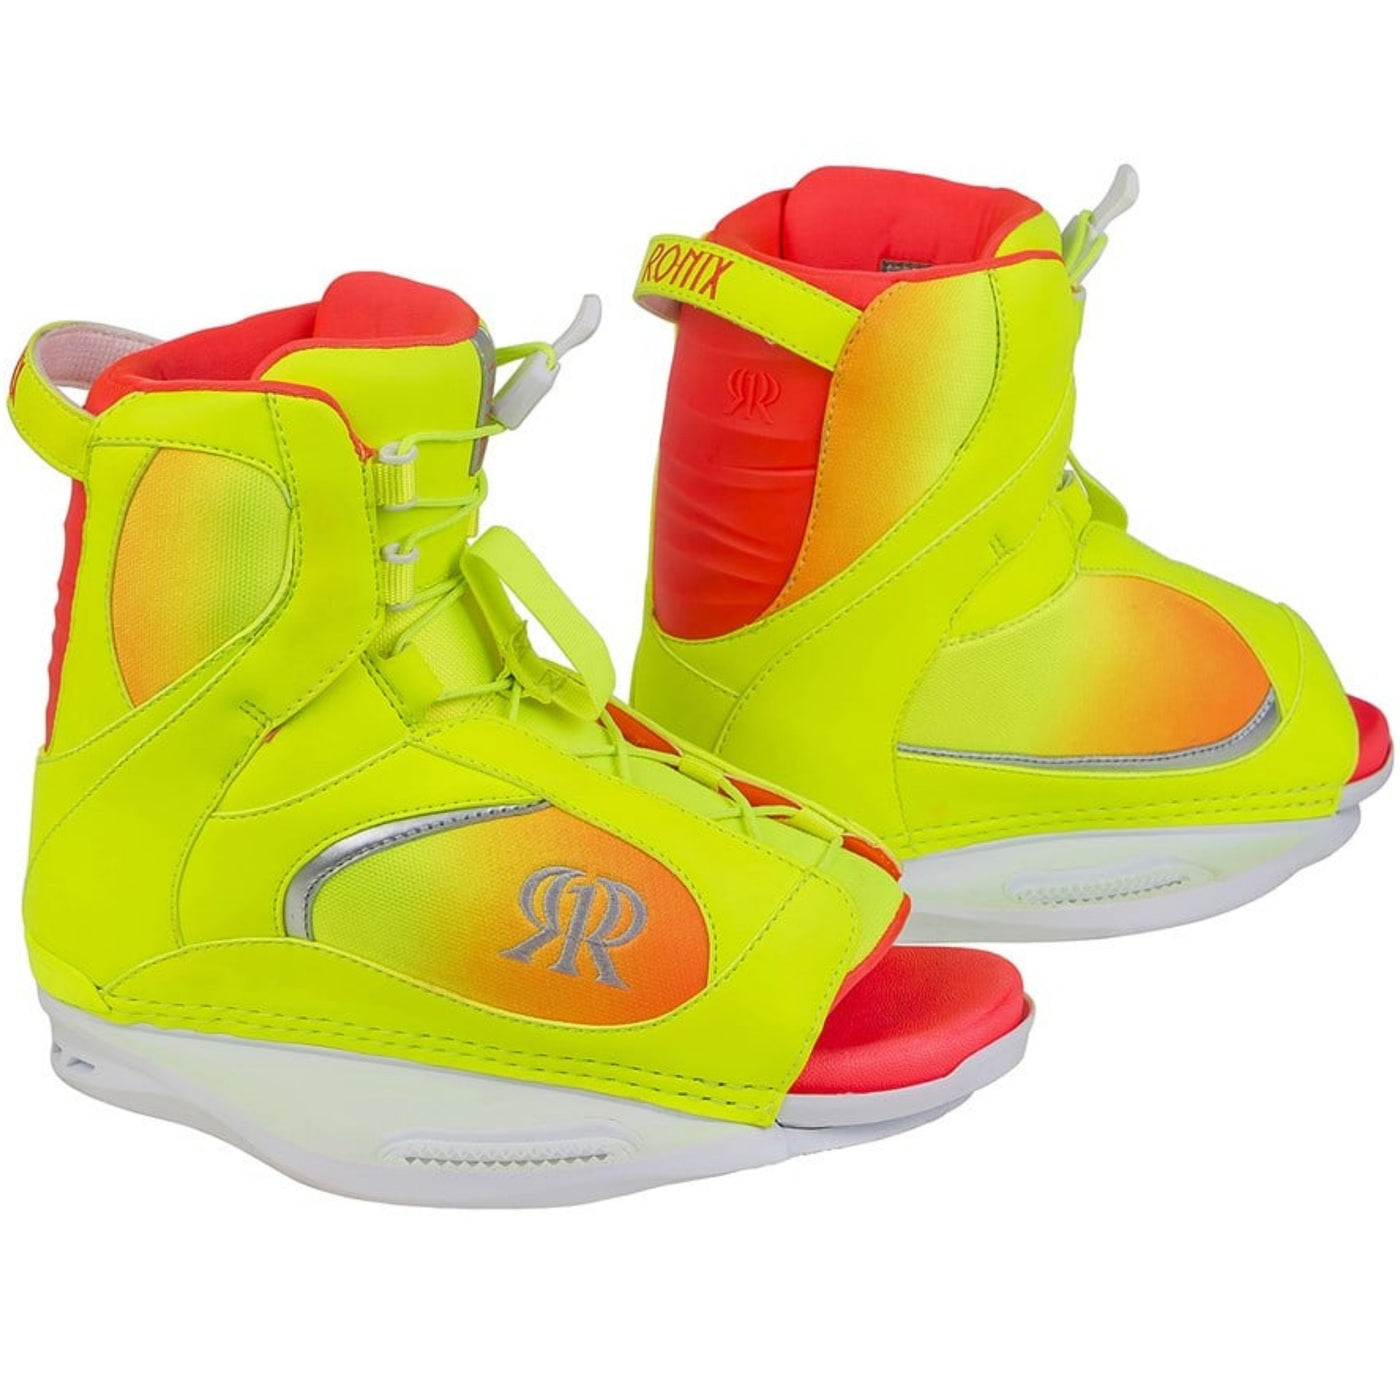 Ronix 2016 Luxe Wakeboard Boots